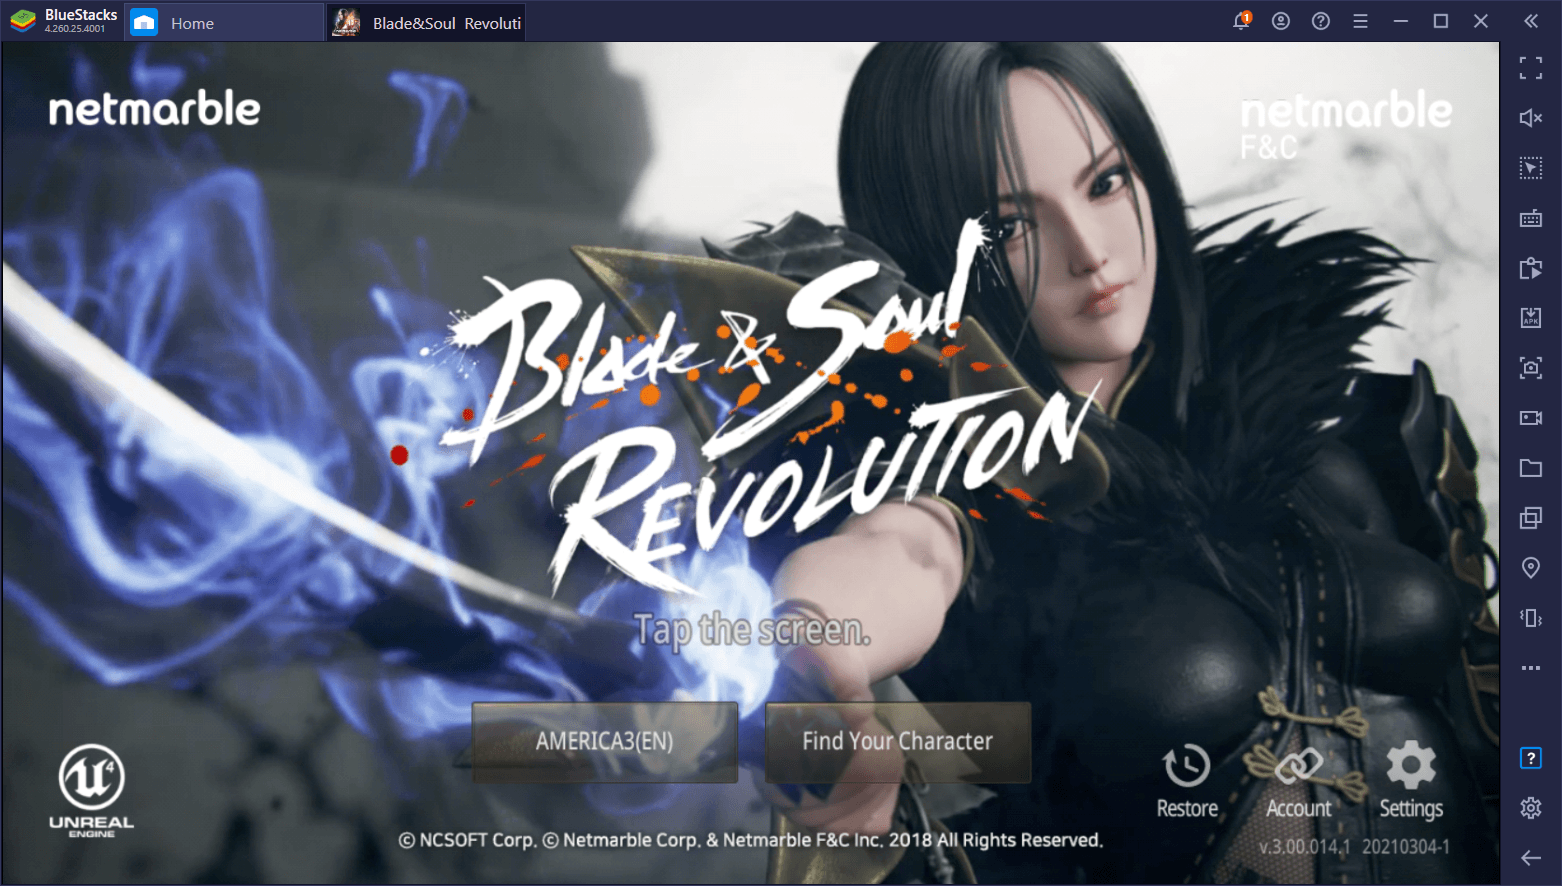 Blade & Soul Revolution - Tips and Tricks for Mastering the Combat